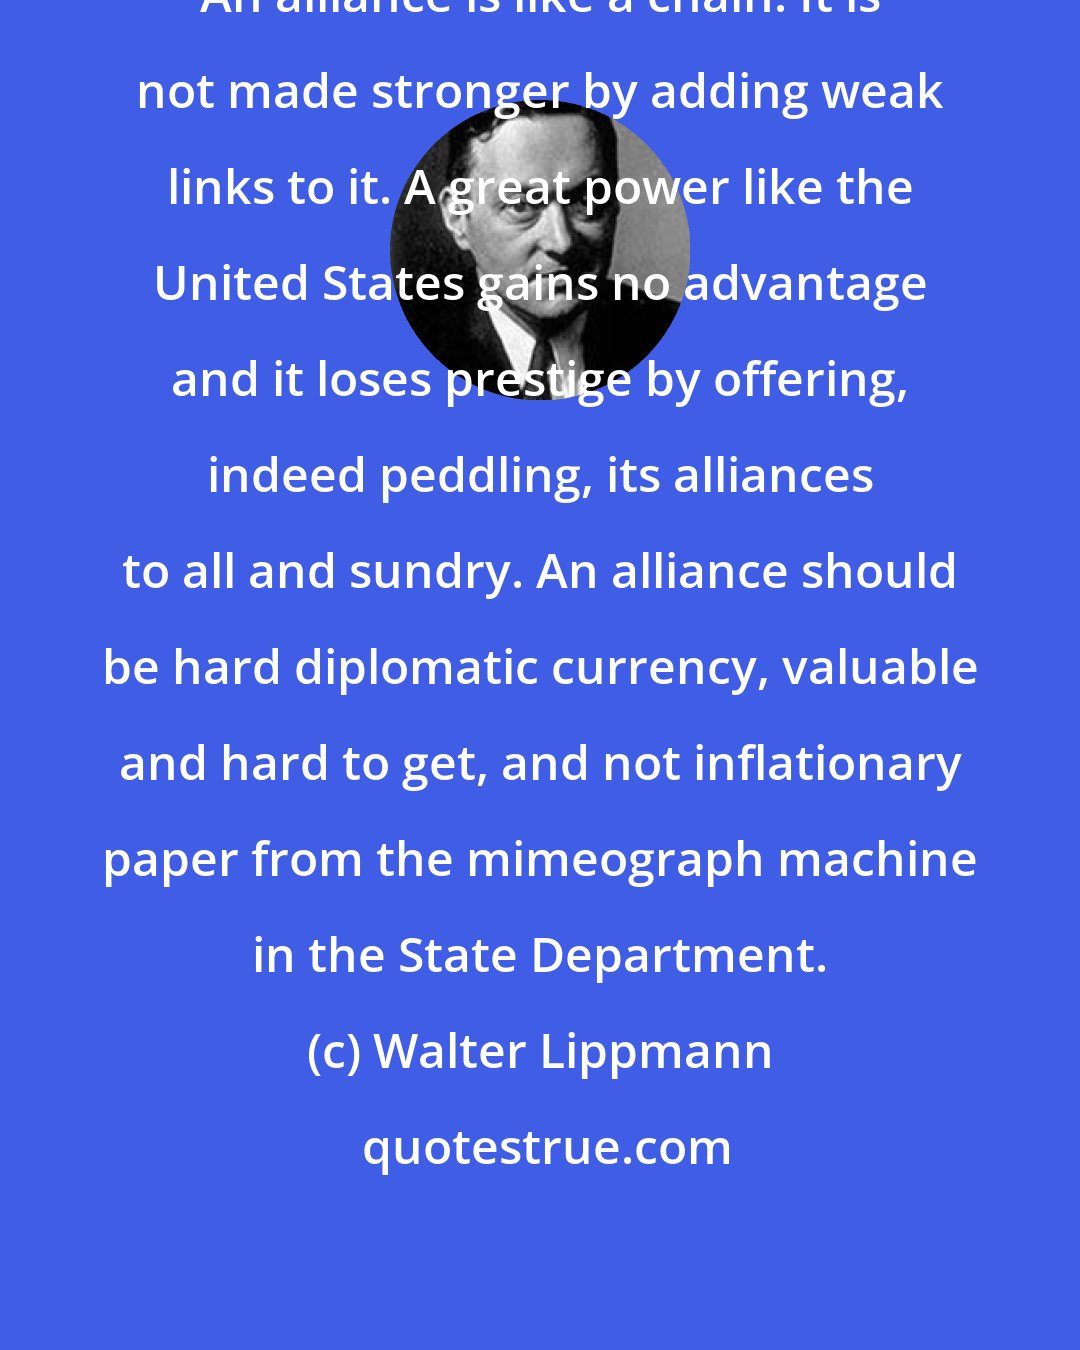 Walter Lippmann: An alliance is like a chain. It is not made stronger by adding weak links to it. A great power like the United States gains no advantage and it loses prestige by offering, indeed peddling, its alliances to all and sundry. An alliance should be hard diplomatic currency, valuable and hard to get, and not inflationary paper from the mimeograph machine in the State Department.